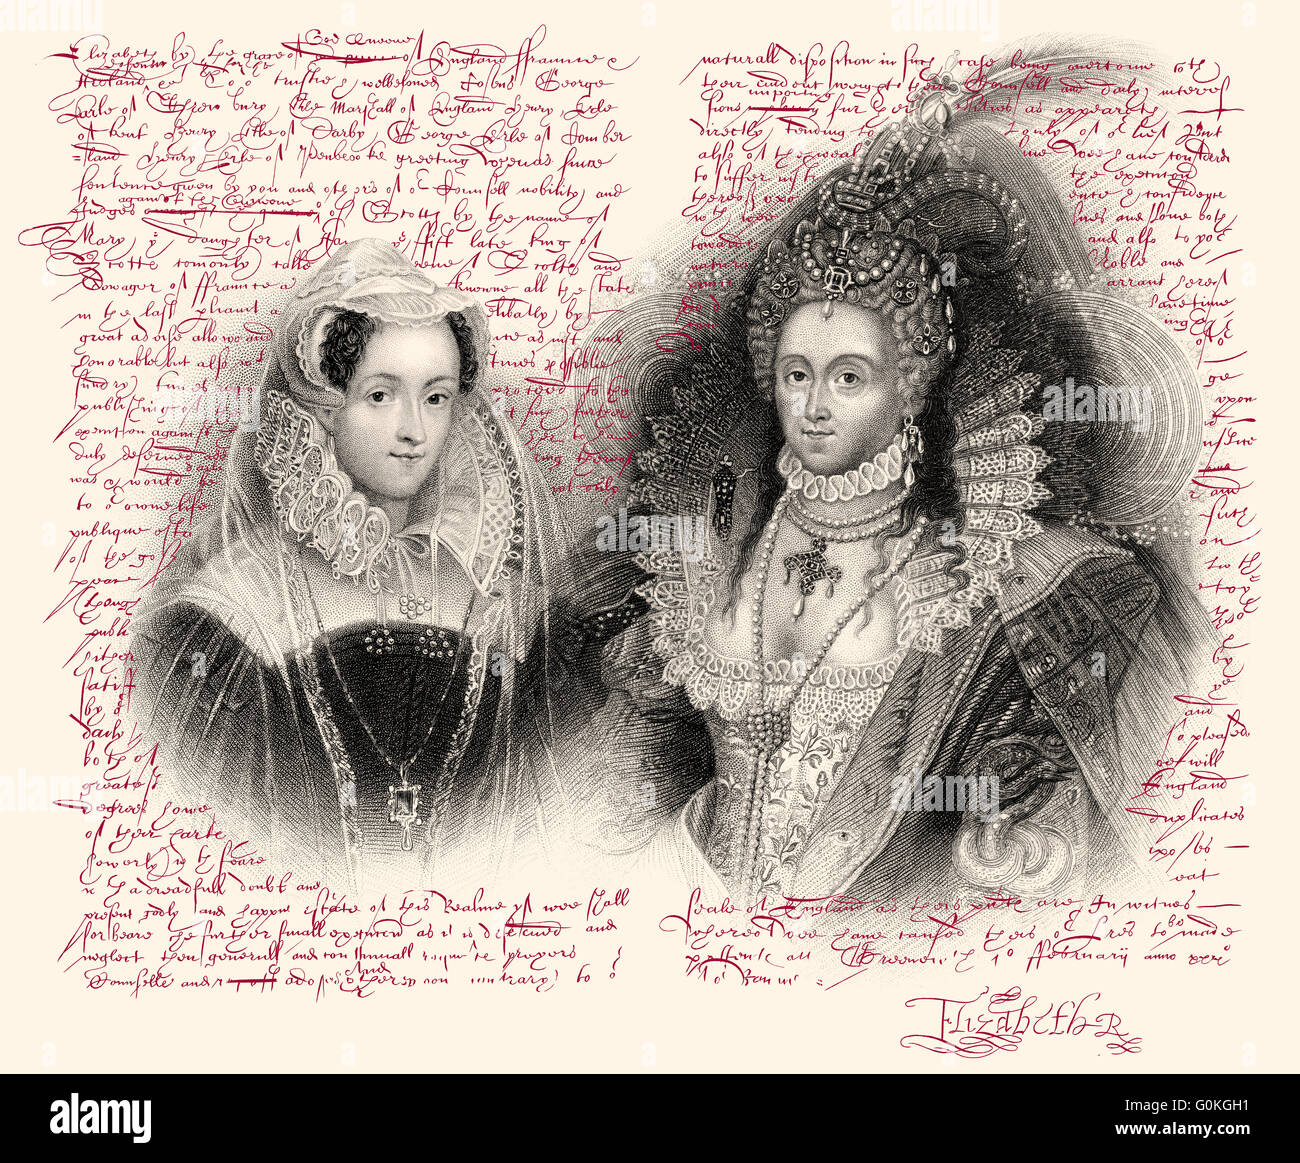 Facsimile, the warrant of execution of Mary Stuart, Queen of Scots, written by Elizabeth I, 1533-1603, Queen of England, on Febr Stock Photo